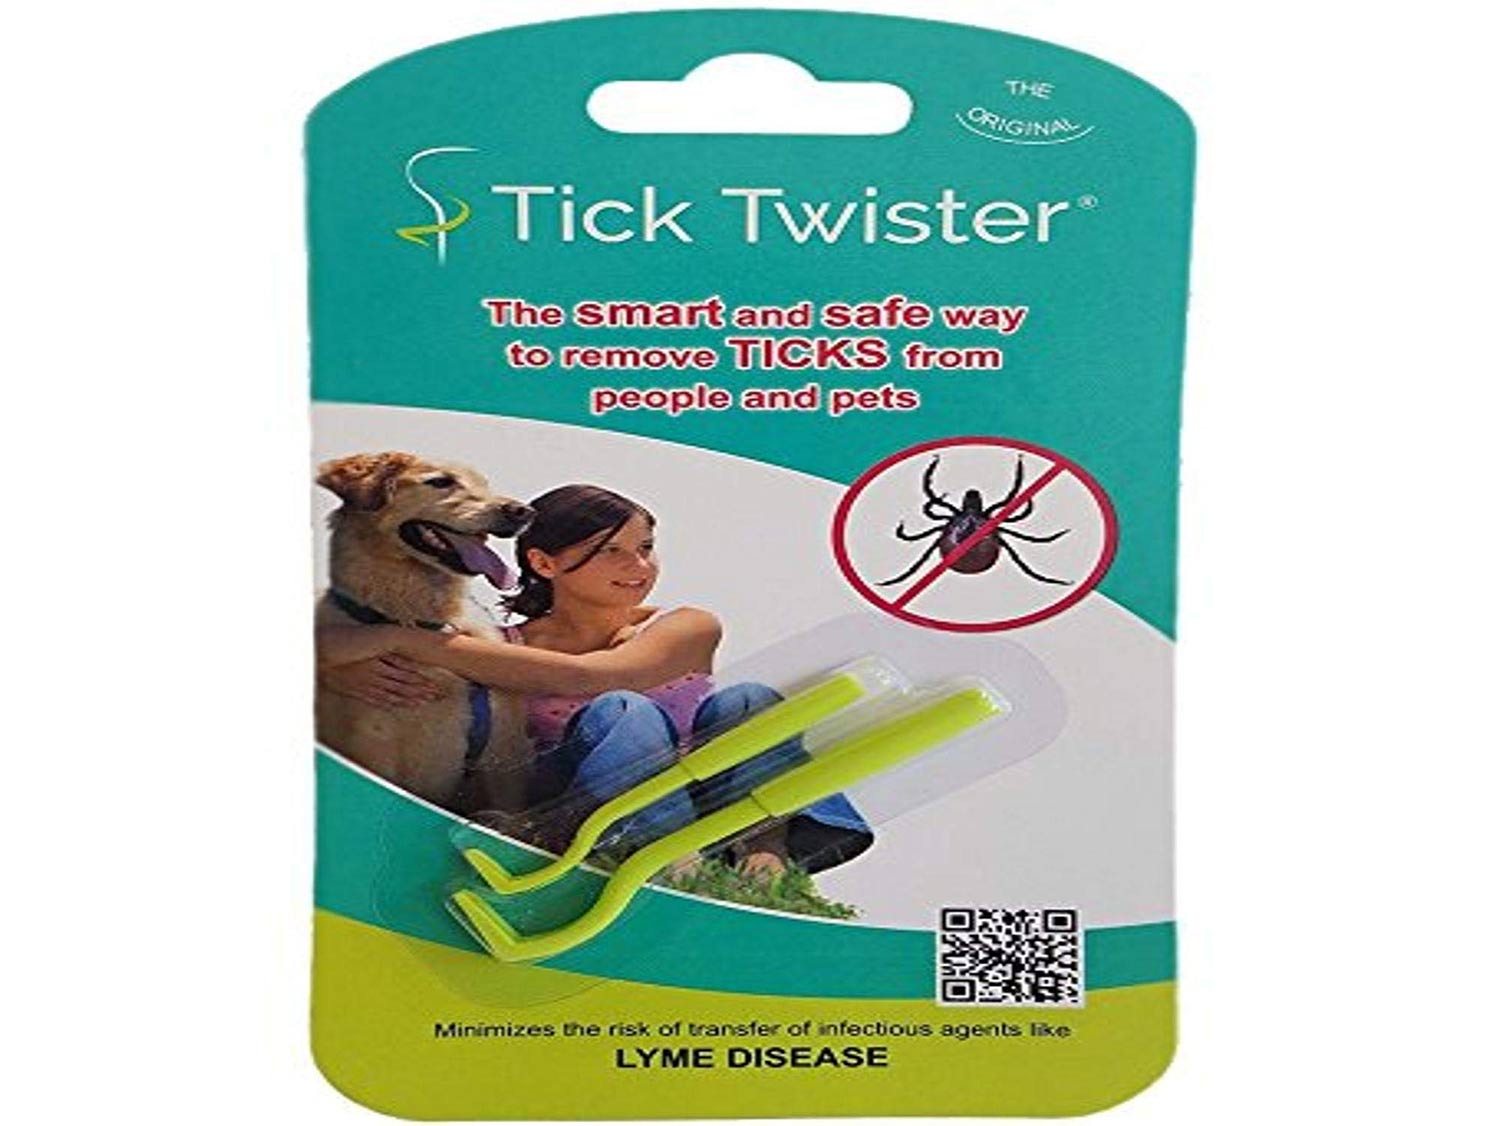 Tick Twister remover tool